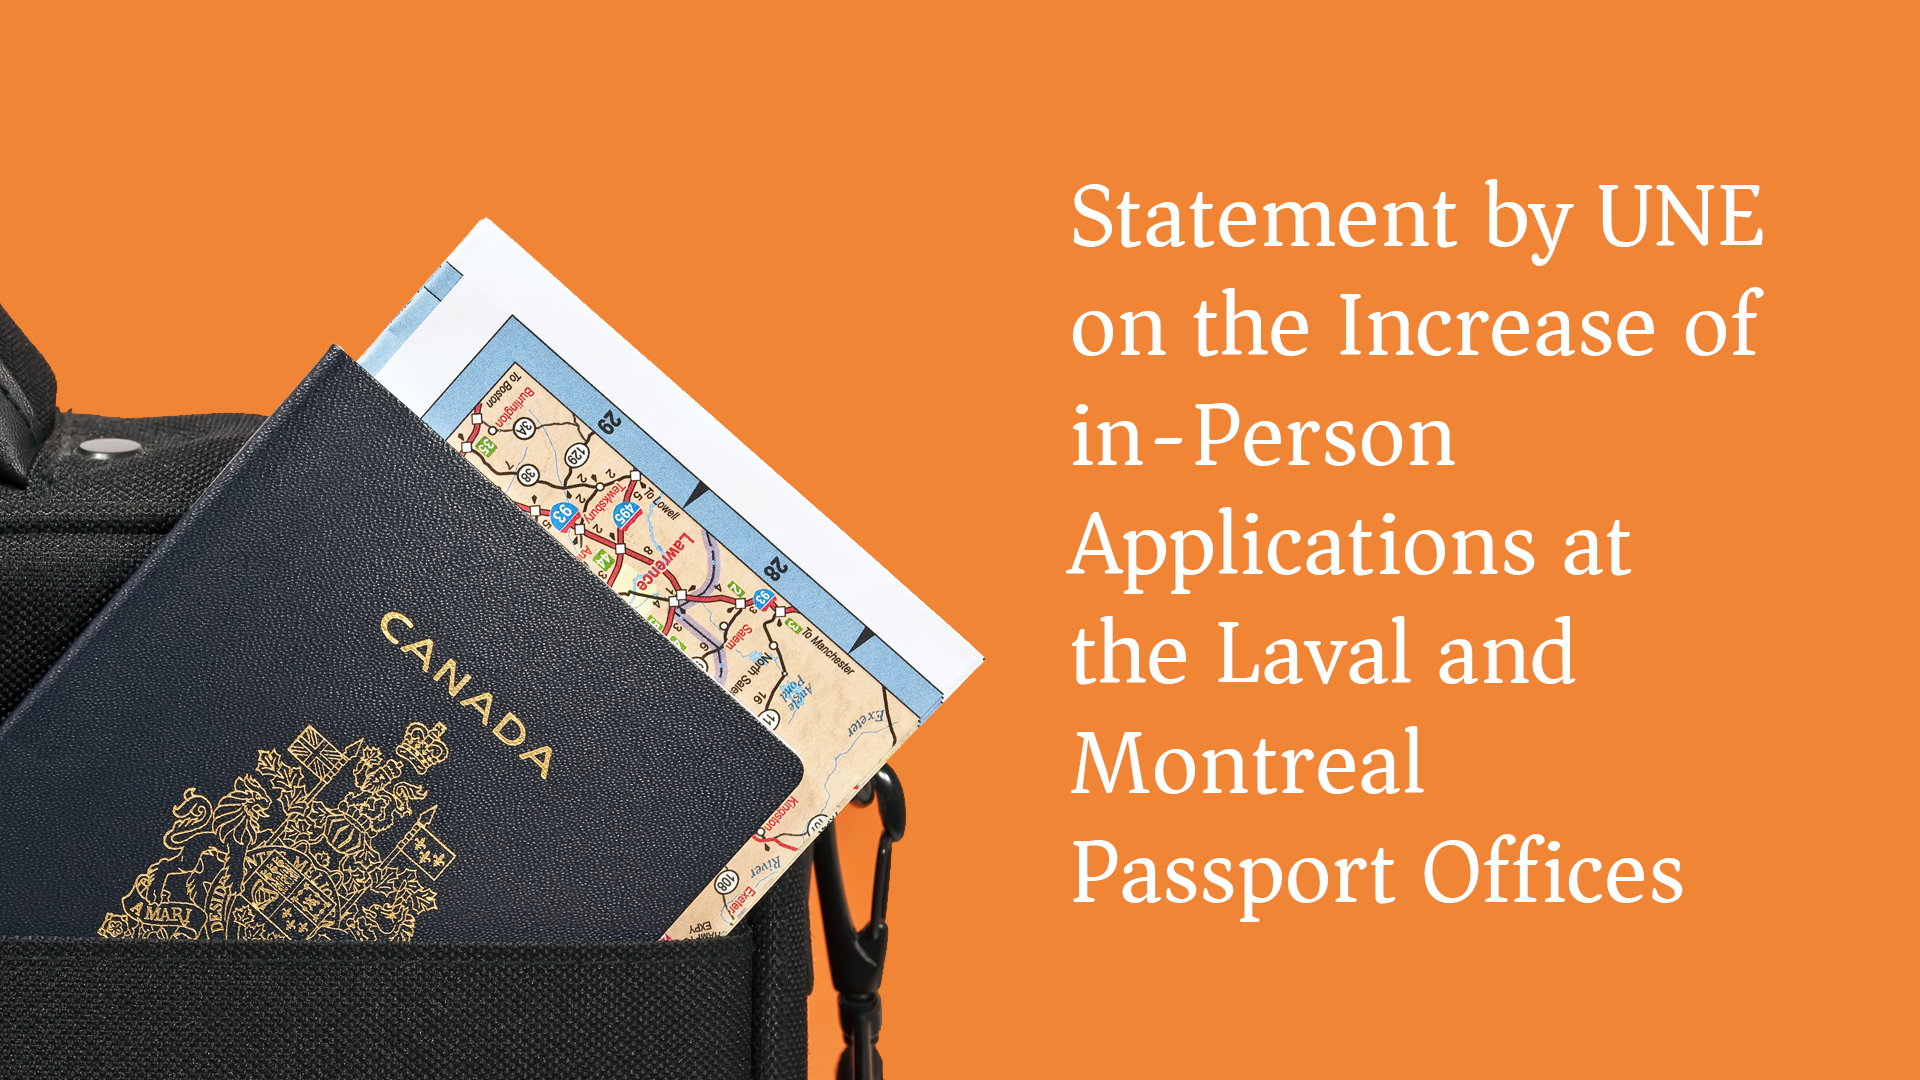 Statement by UNE on the Increase of in-Person Applications at the Laval and Montreal Passport Offices